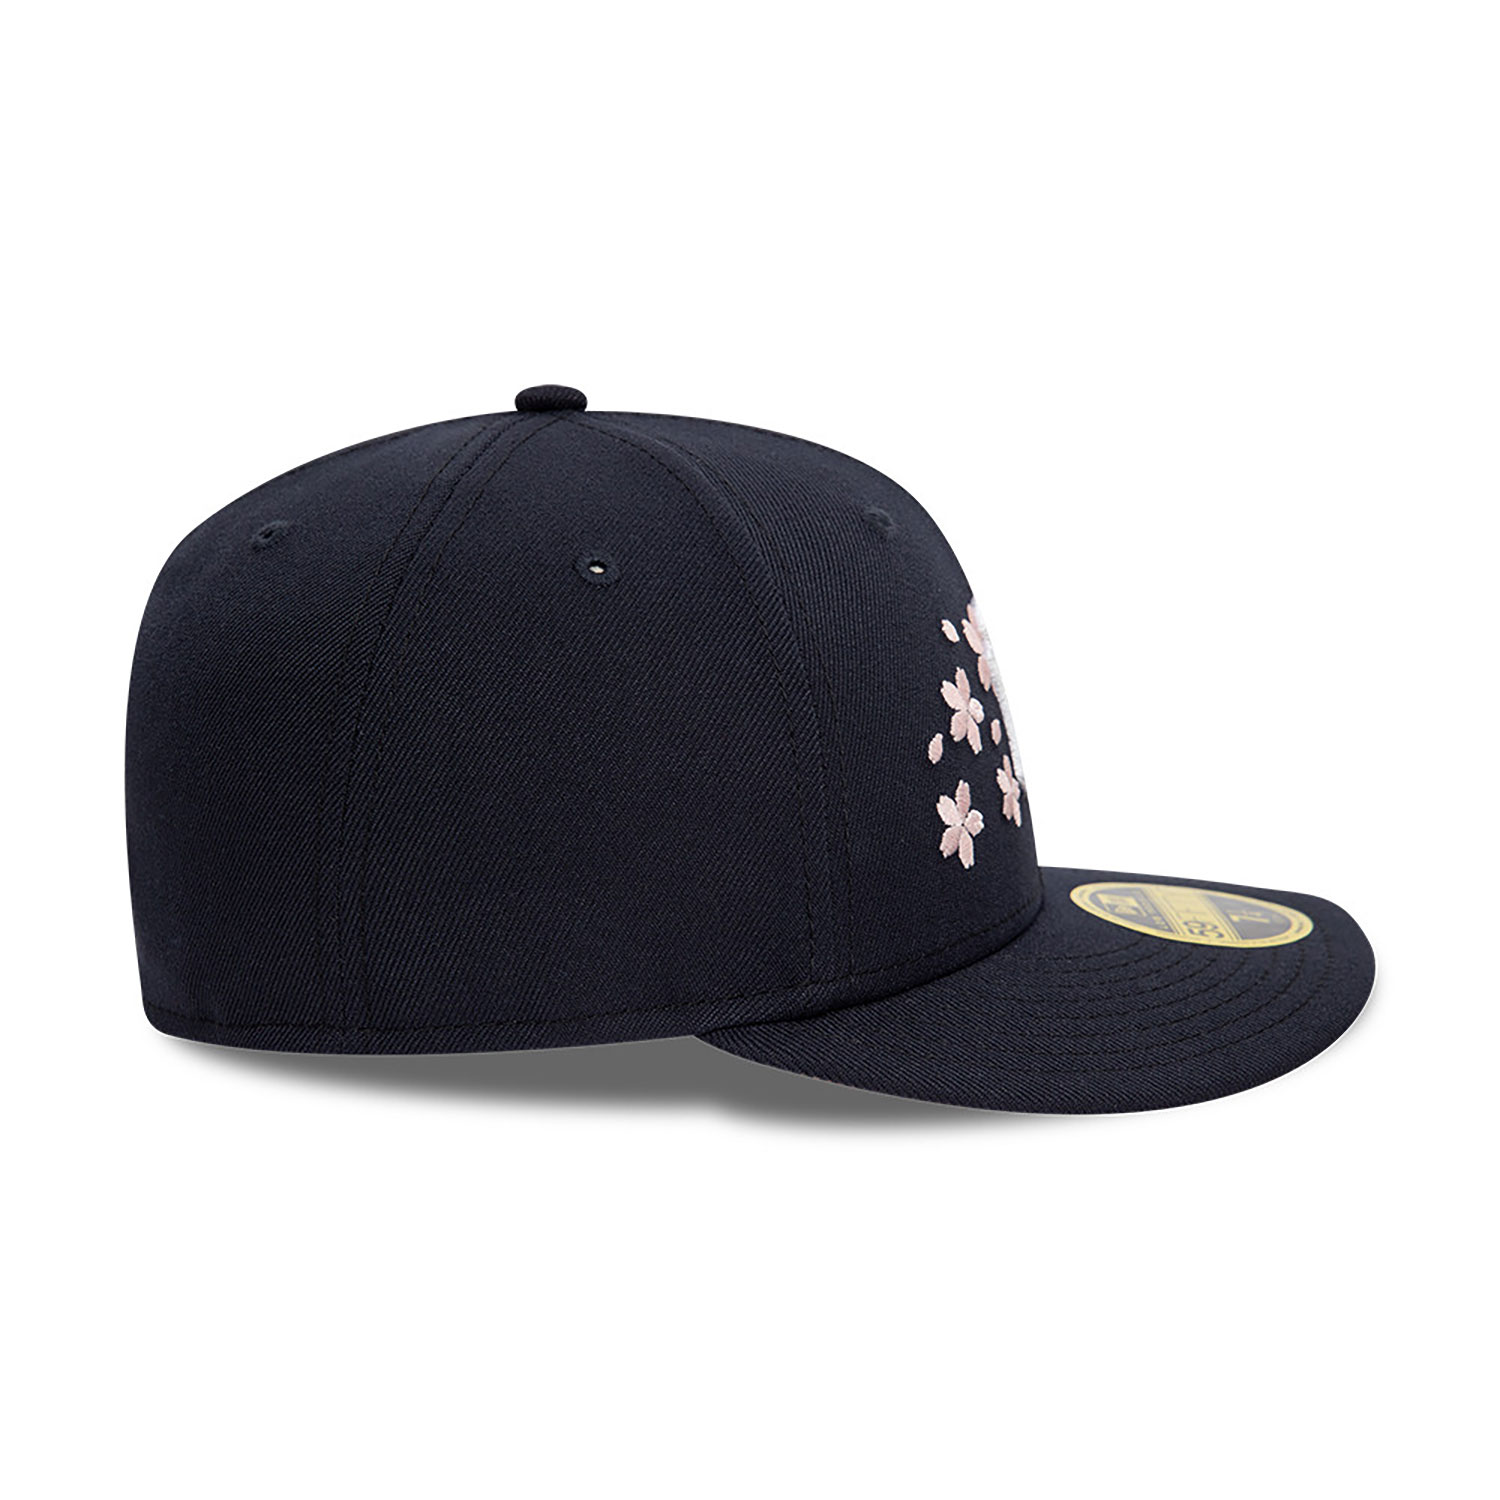 New York Yankees Cherry Blossom Navy Low Profile 59FIFTY Fitted Cap